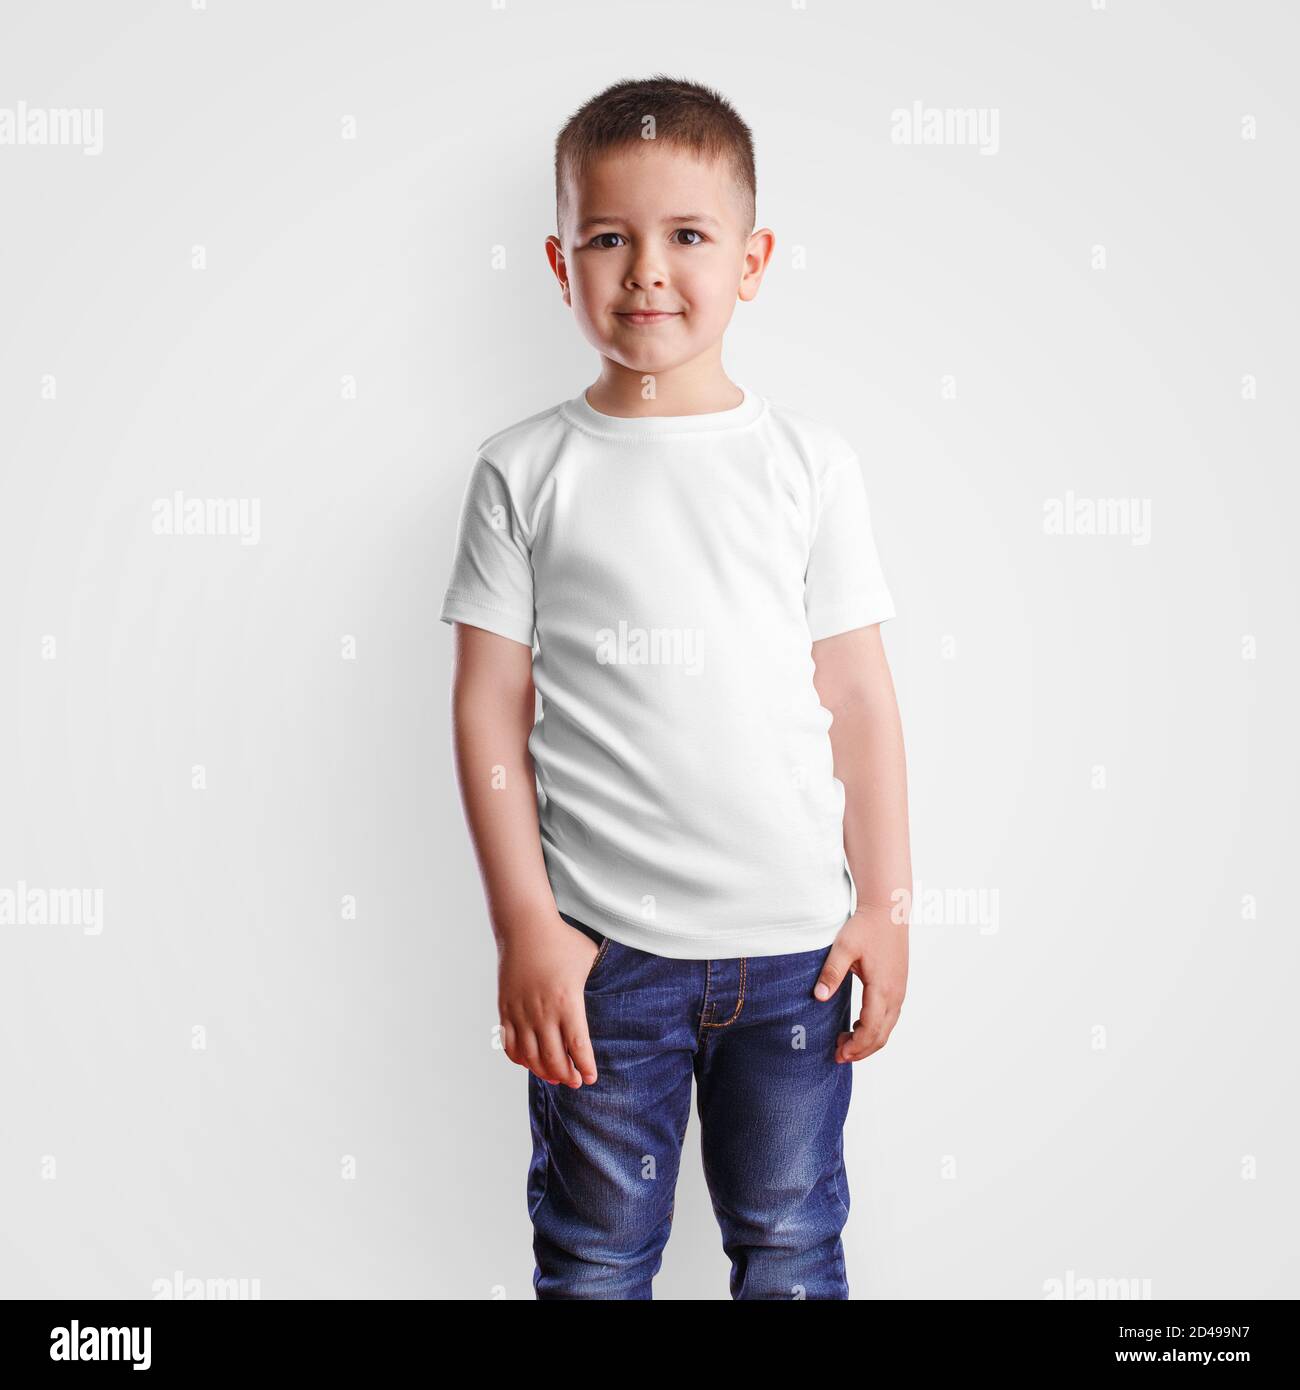 Download White T Shirt Mockup On Handsome Boy In Blue Jeans Blank Clothes For Design And Pattern Presentation Casual Kidwear Template Isolated On Background Stock Photo Alamy